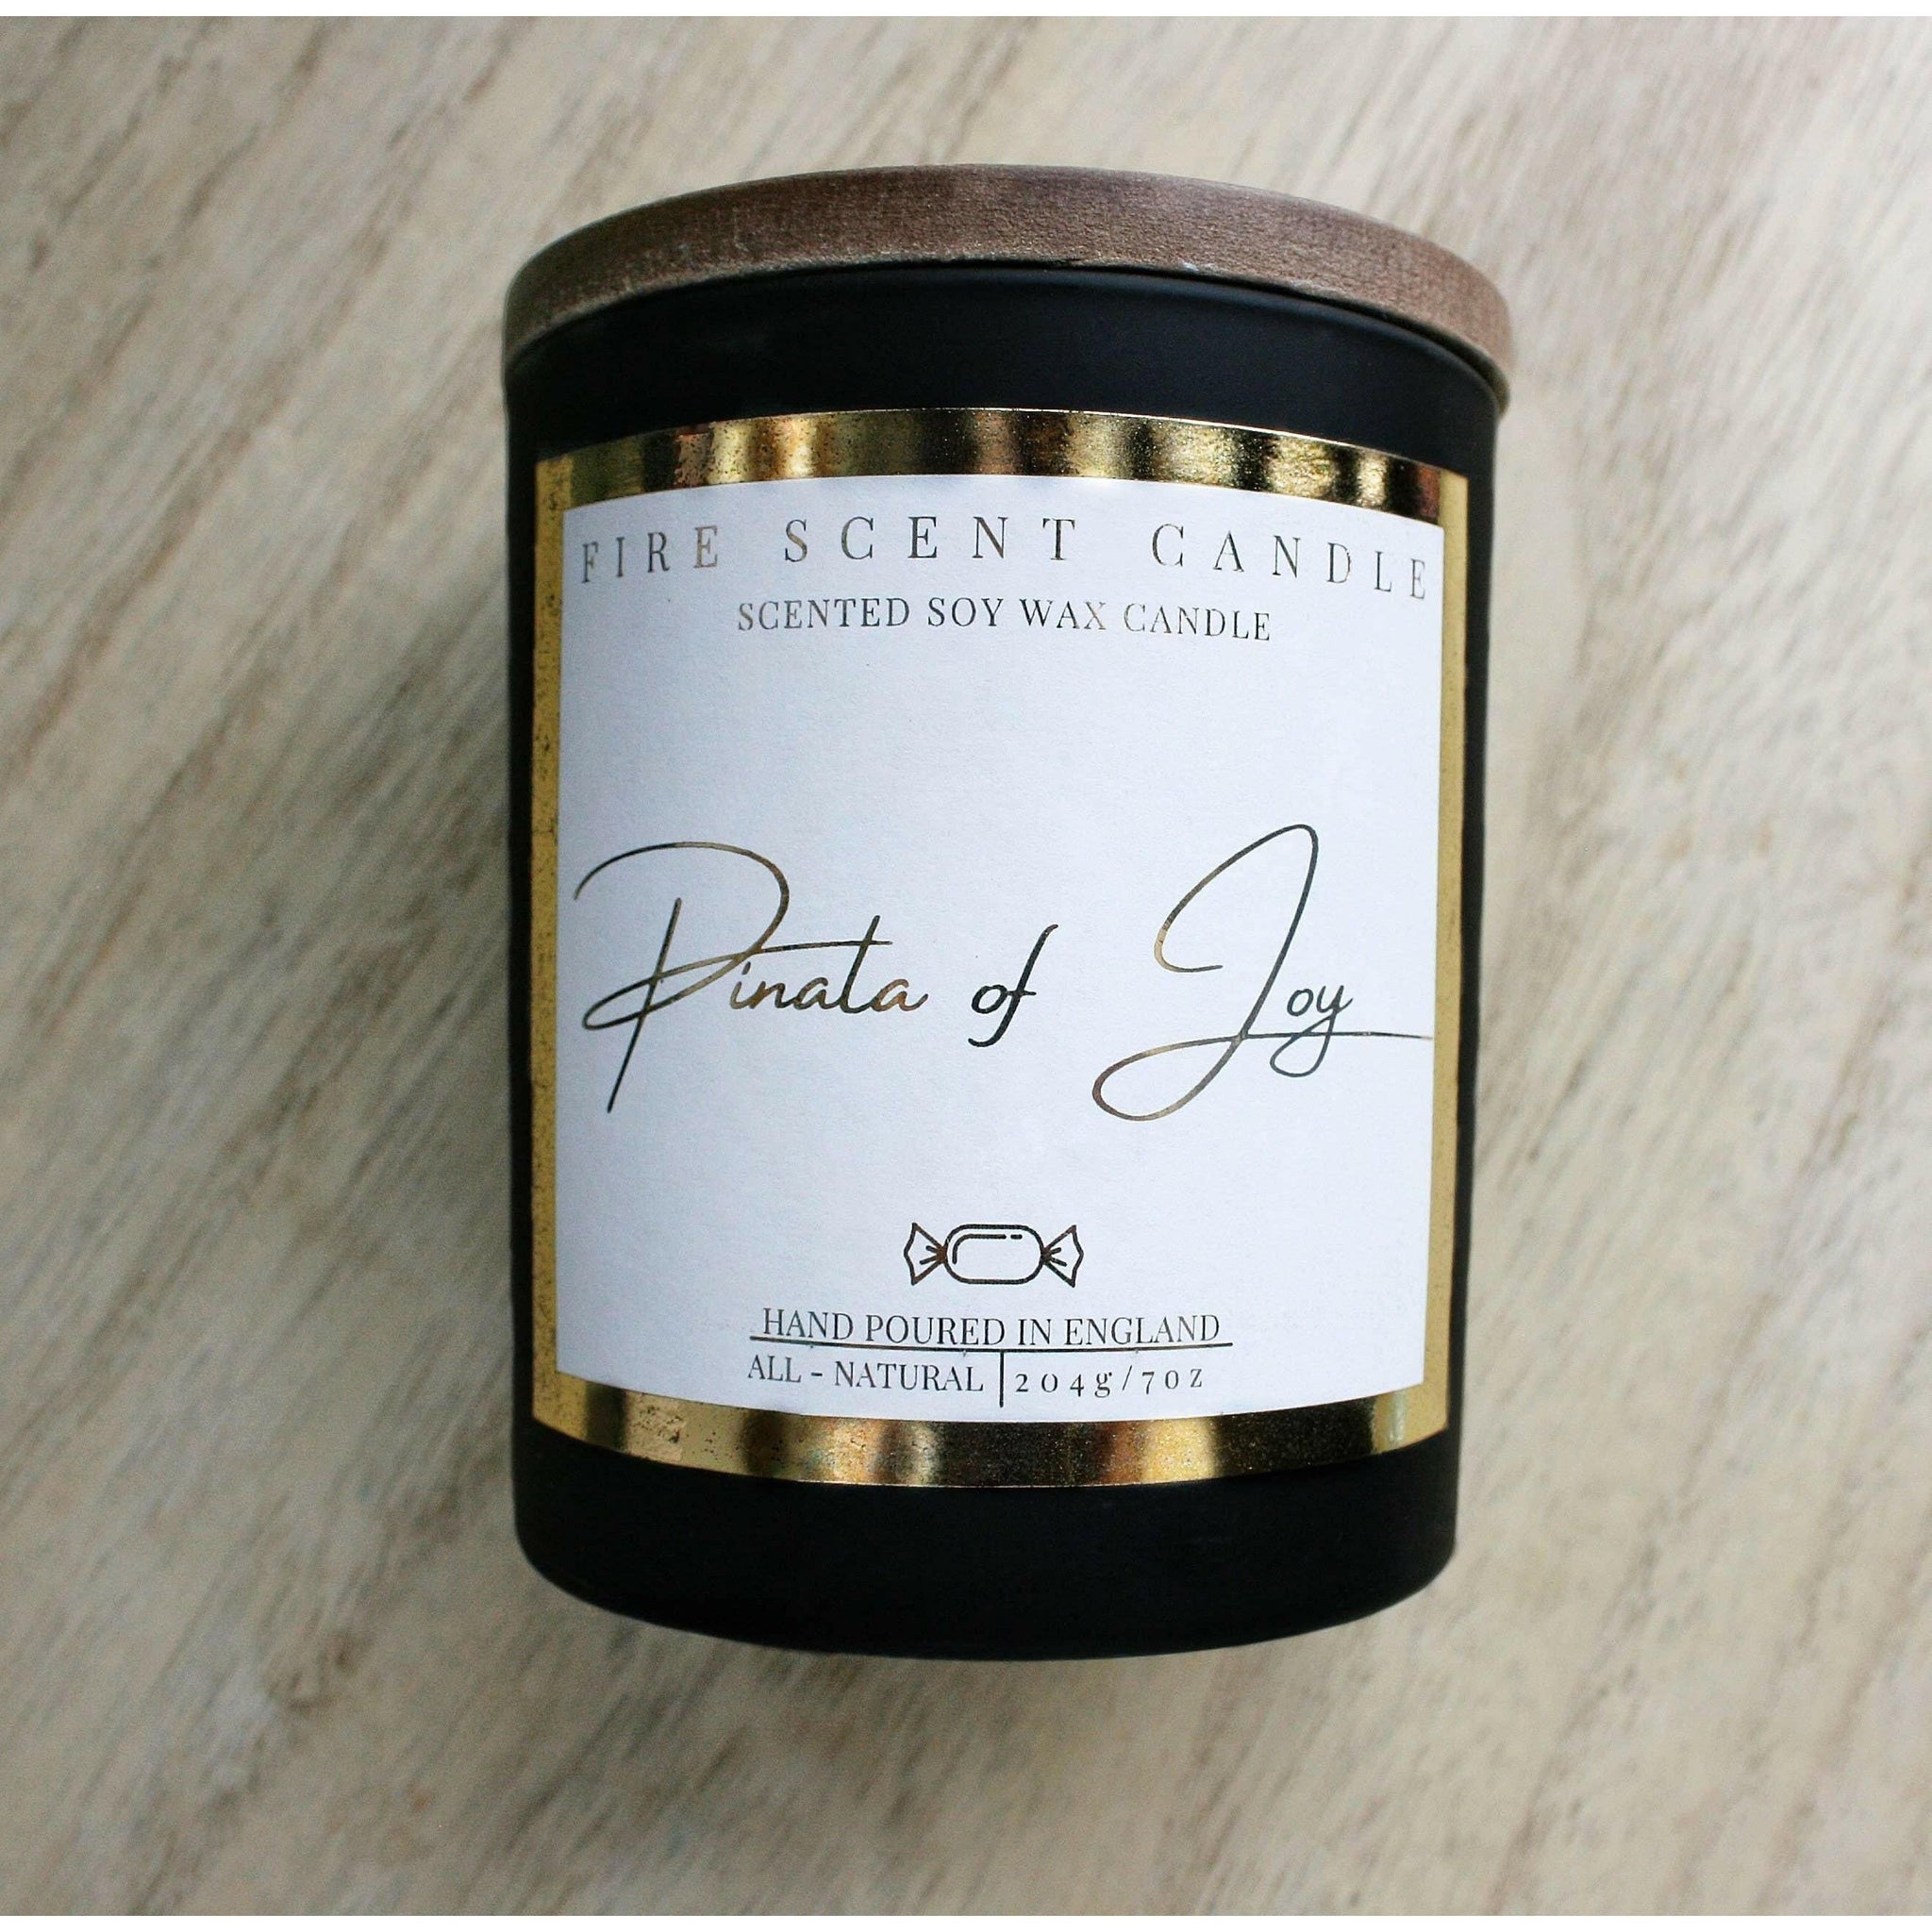 Pinata of Joy Luxury Scented Soy Wax Candle